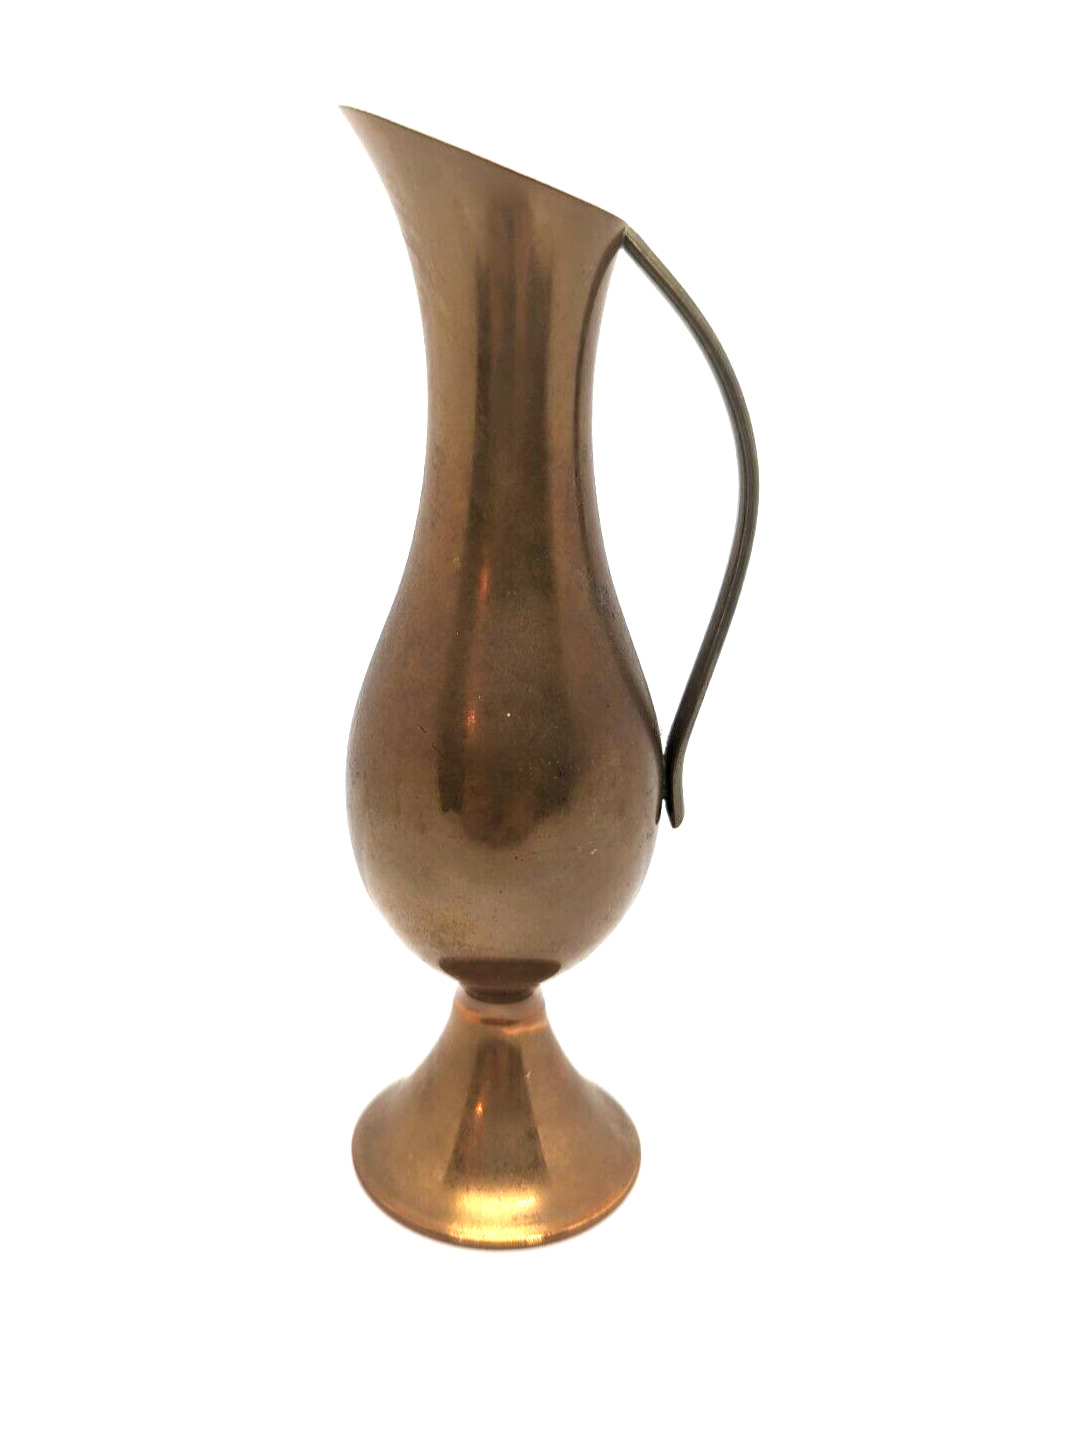 Vintage Small Copper Pitcher Brass Handle French Country MCM Vase Dented Patina